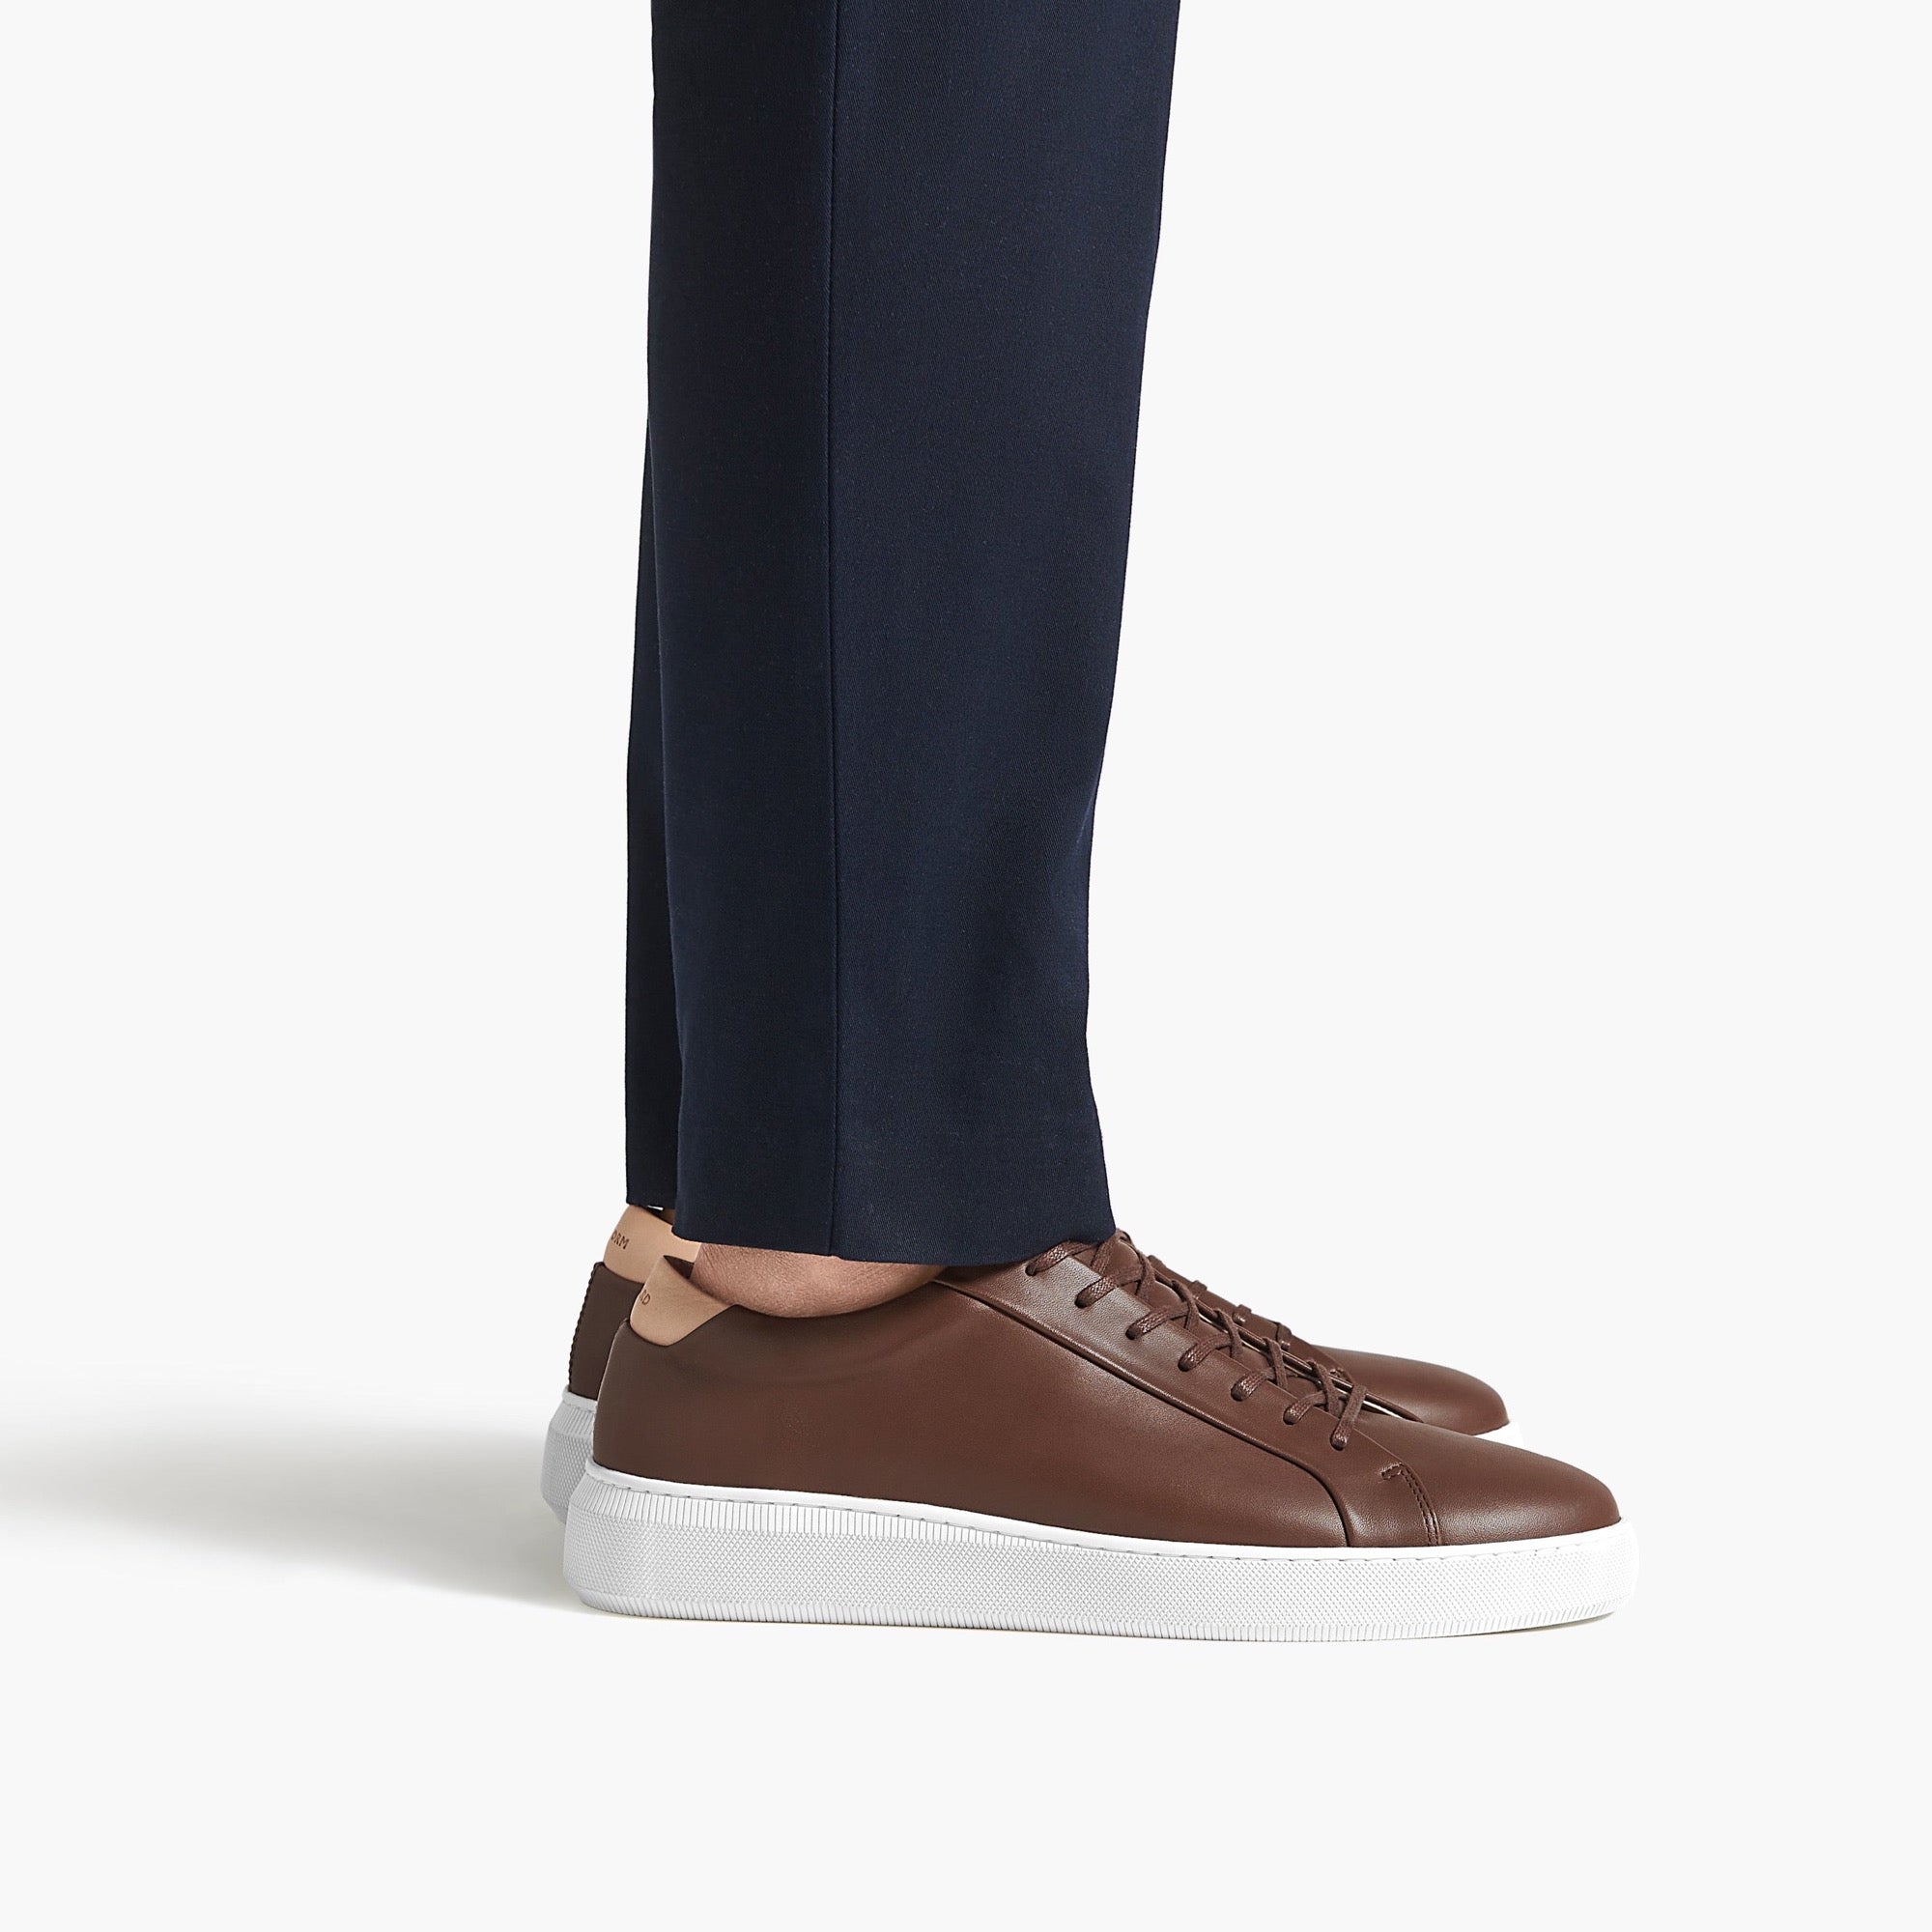 Series 8 Chestnut Leather Mens